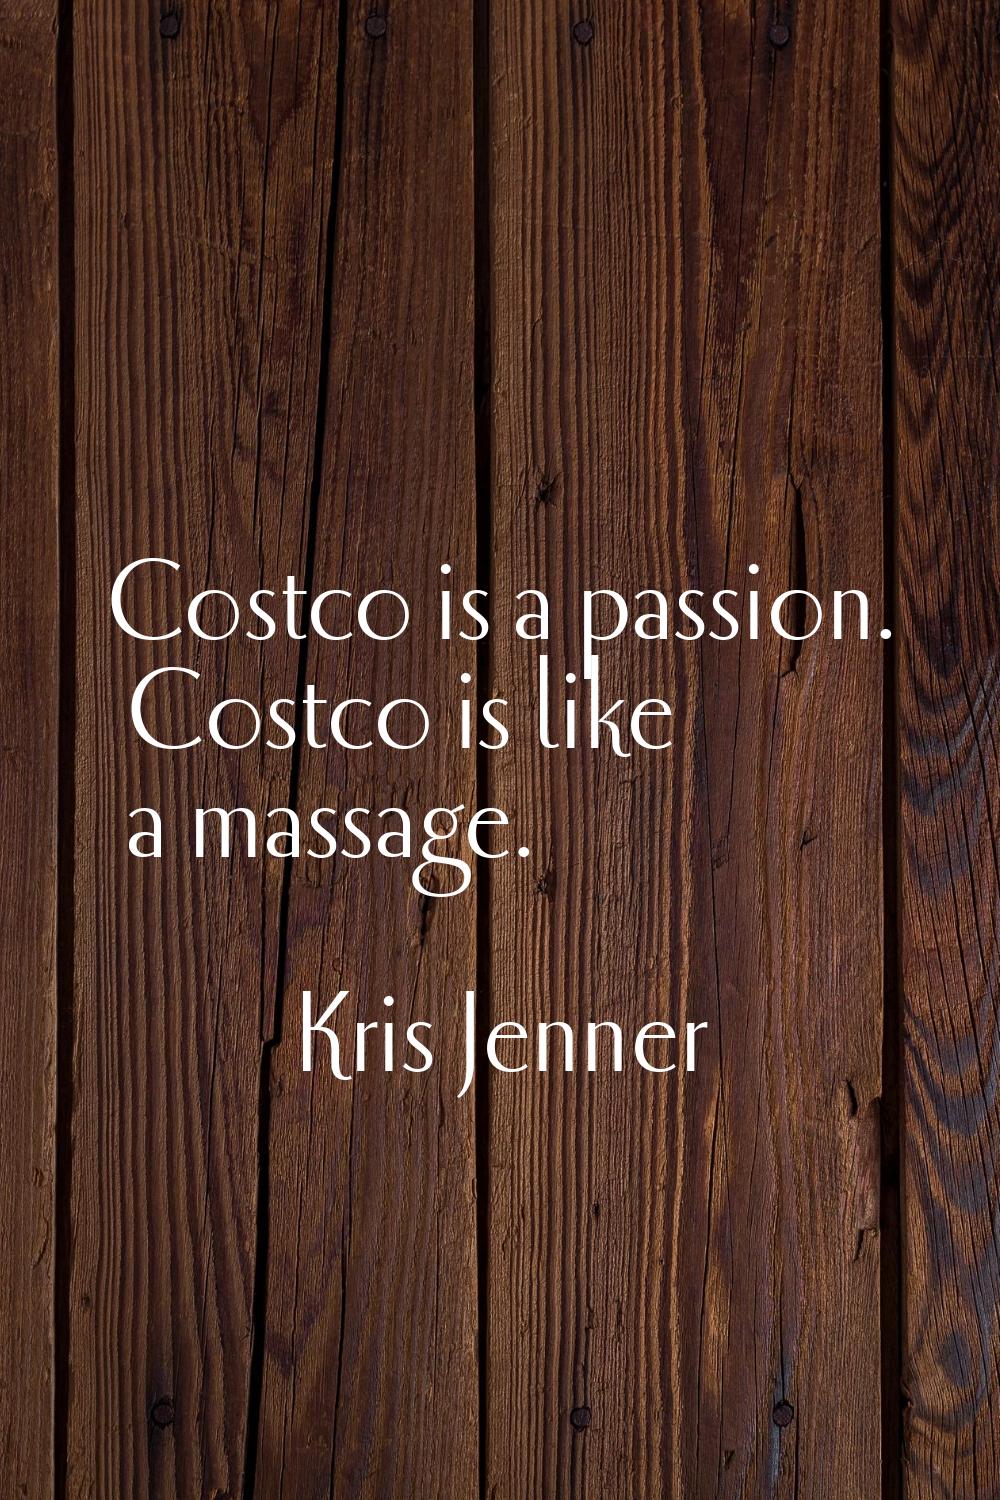 Costco is a passion. Costco is like a massage.